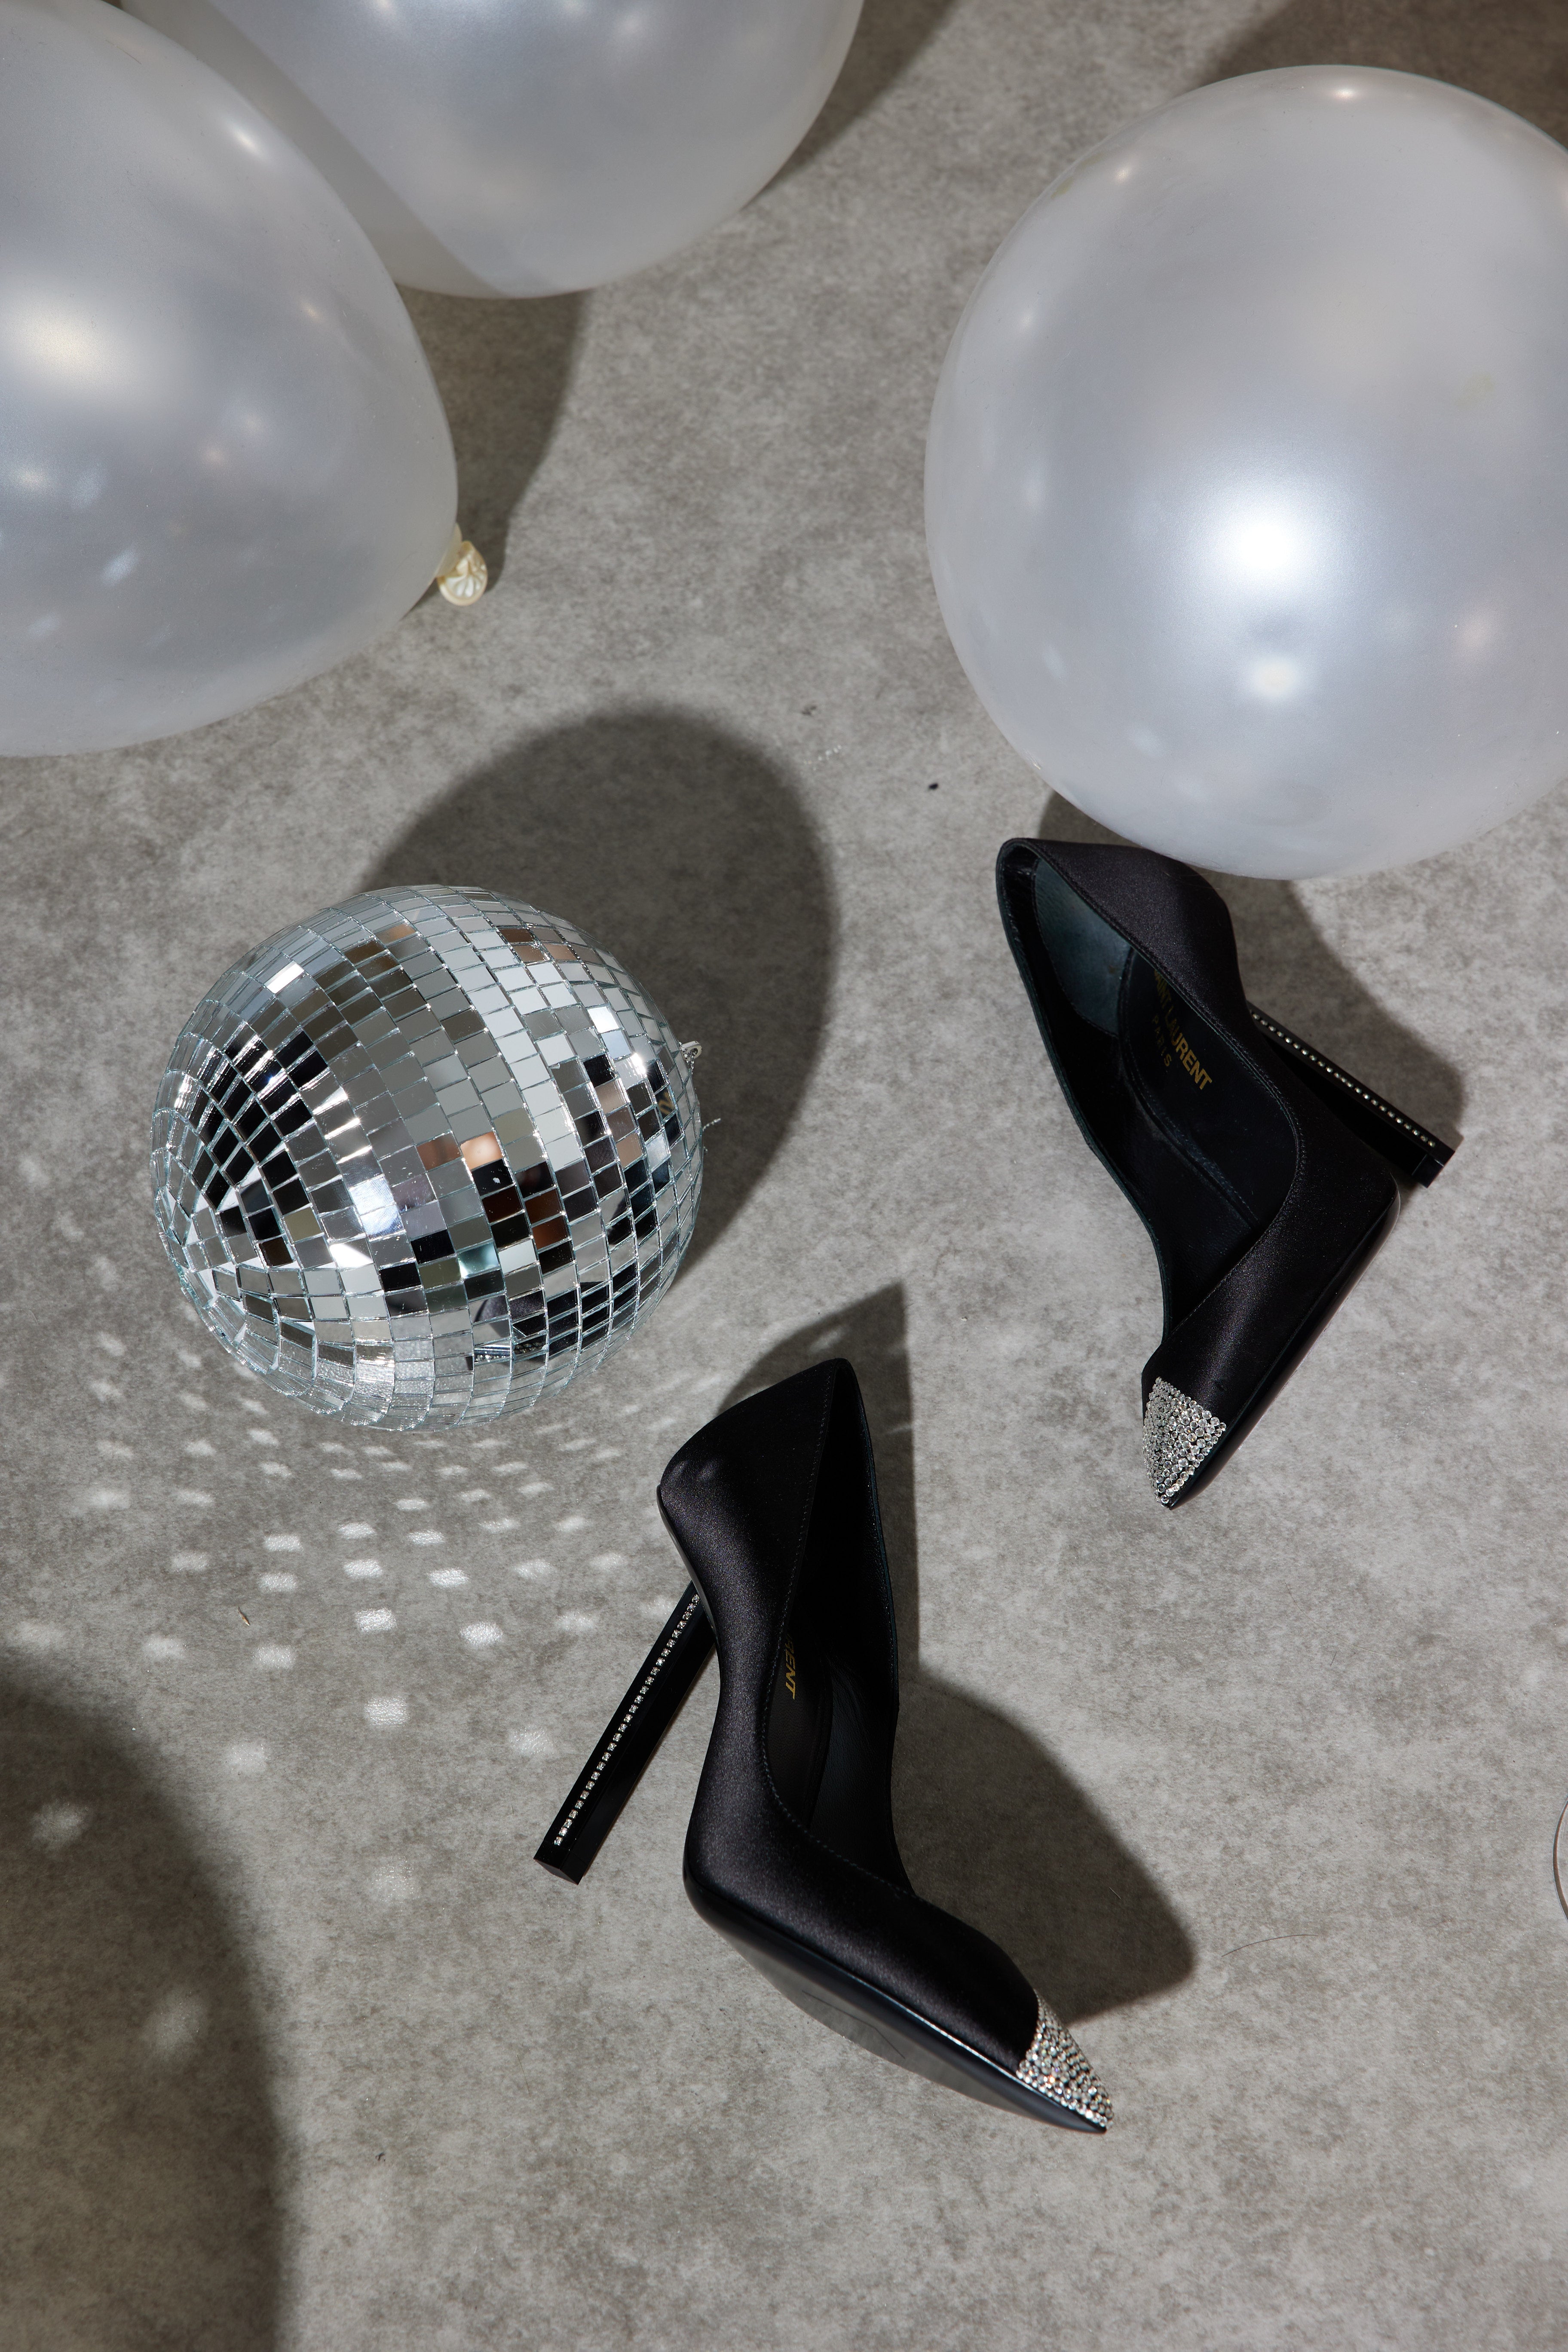 Saint Lauren Black Tower 110 heels aesthetically laying on floor with disco ball and white ballons